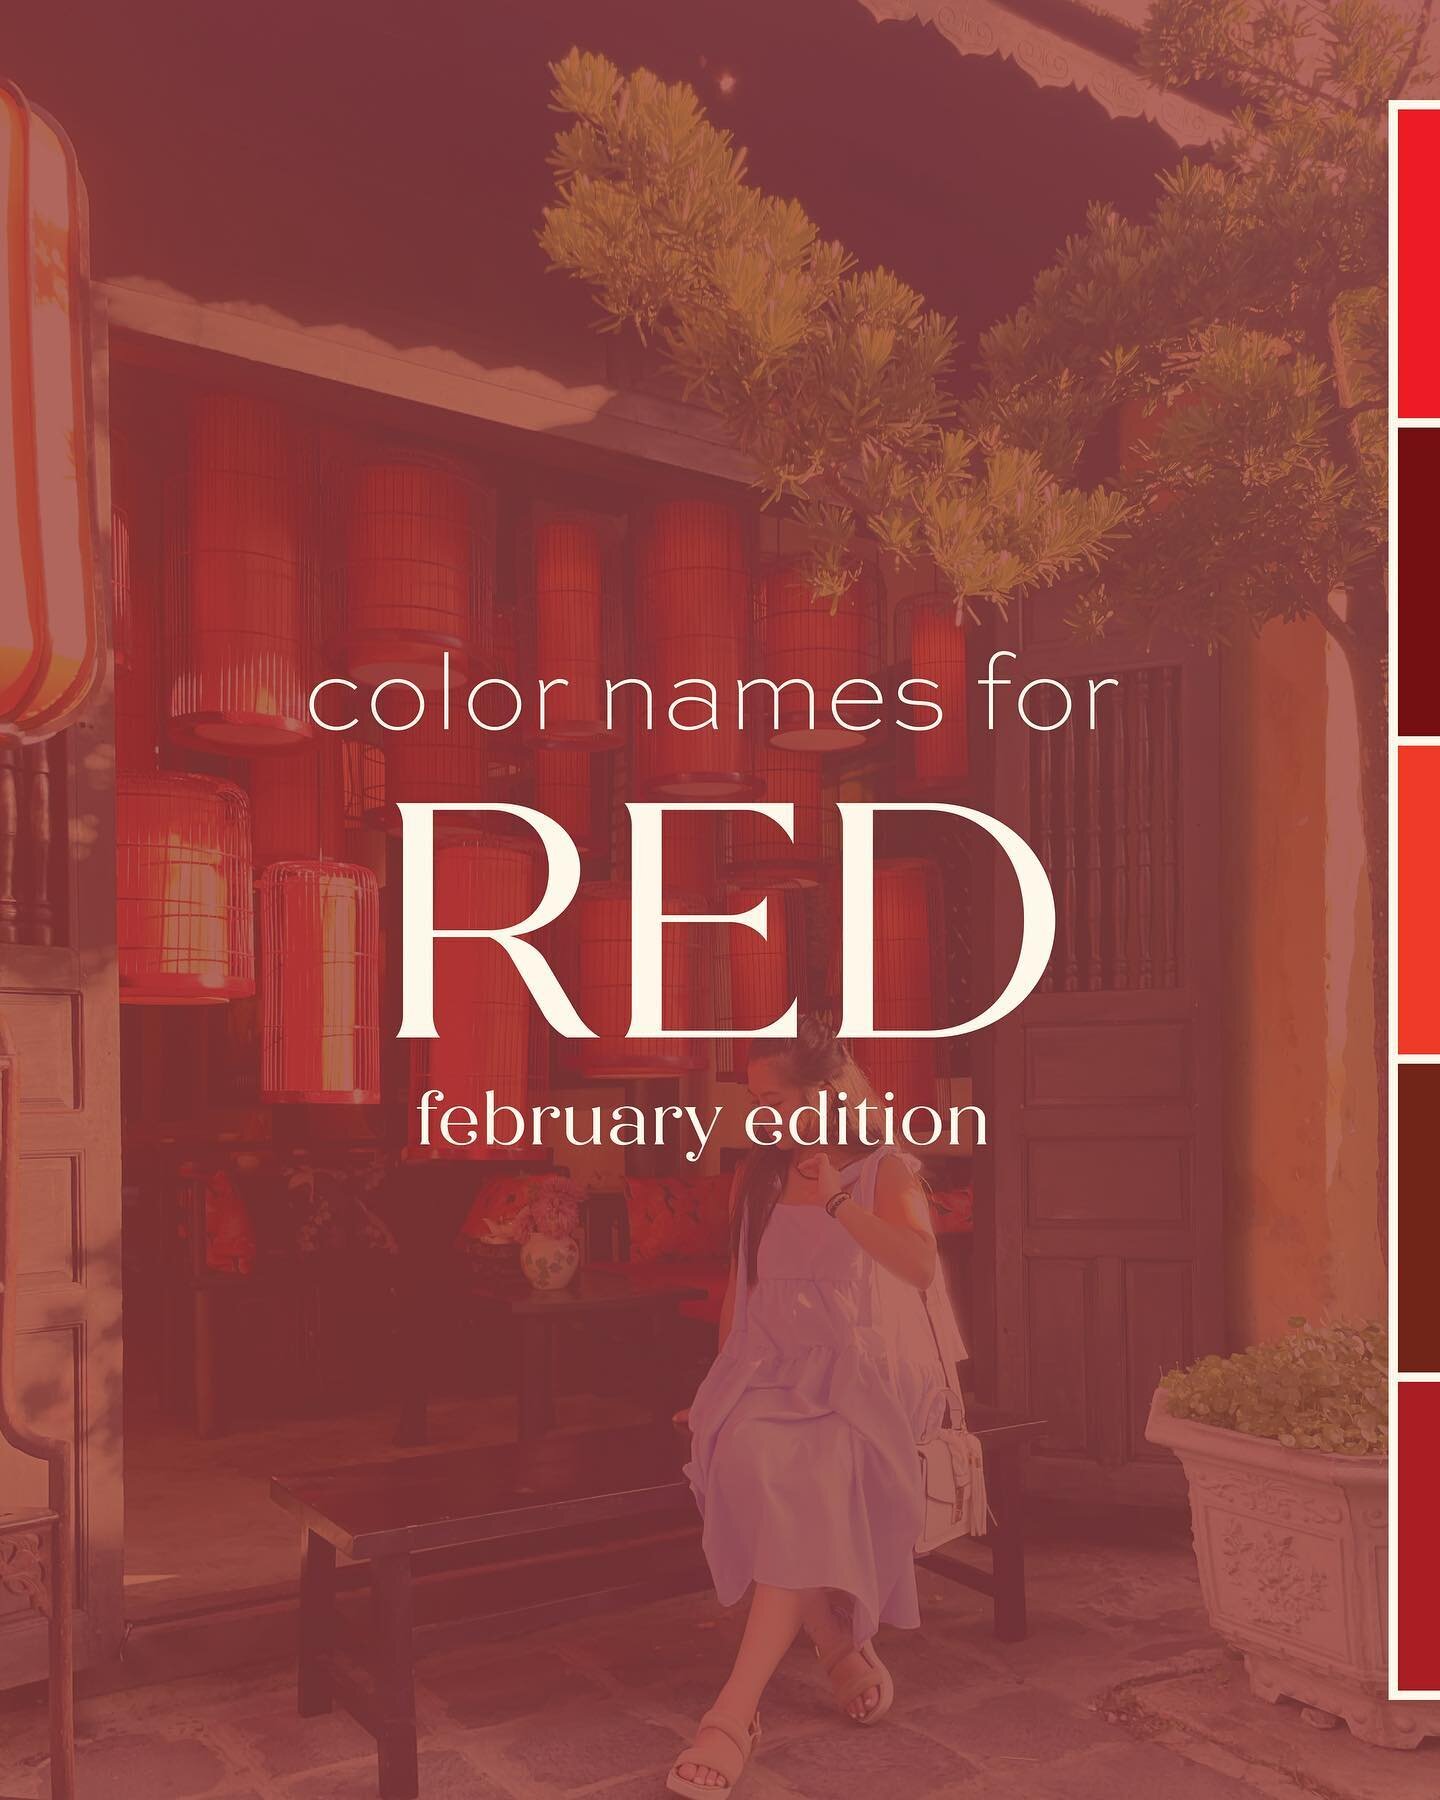 I thought it would be fun to come up with color names for holidays in february, lunar new year and valentine&rsquo;s day!

strawberry is definitely grabbing my attention🍓which one do you love?!

#graphicdesign #graphicdesigner #design #designer #des